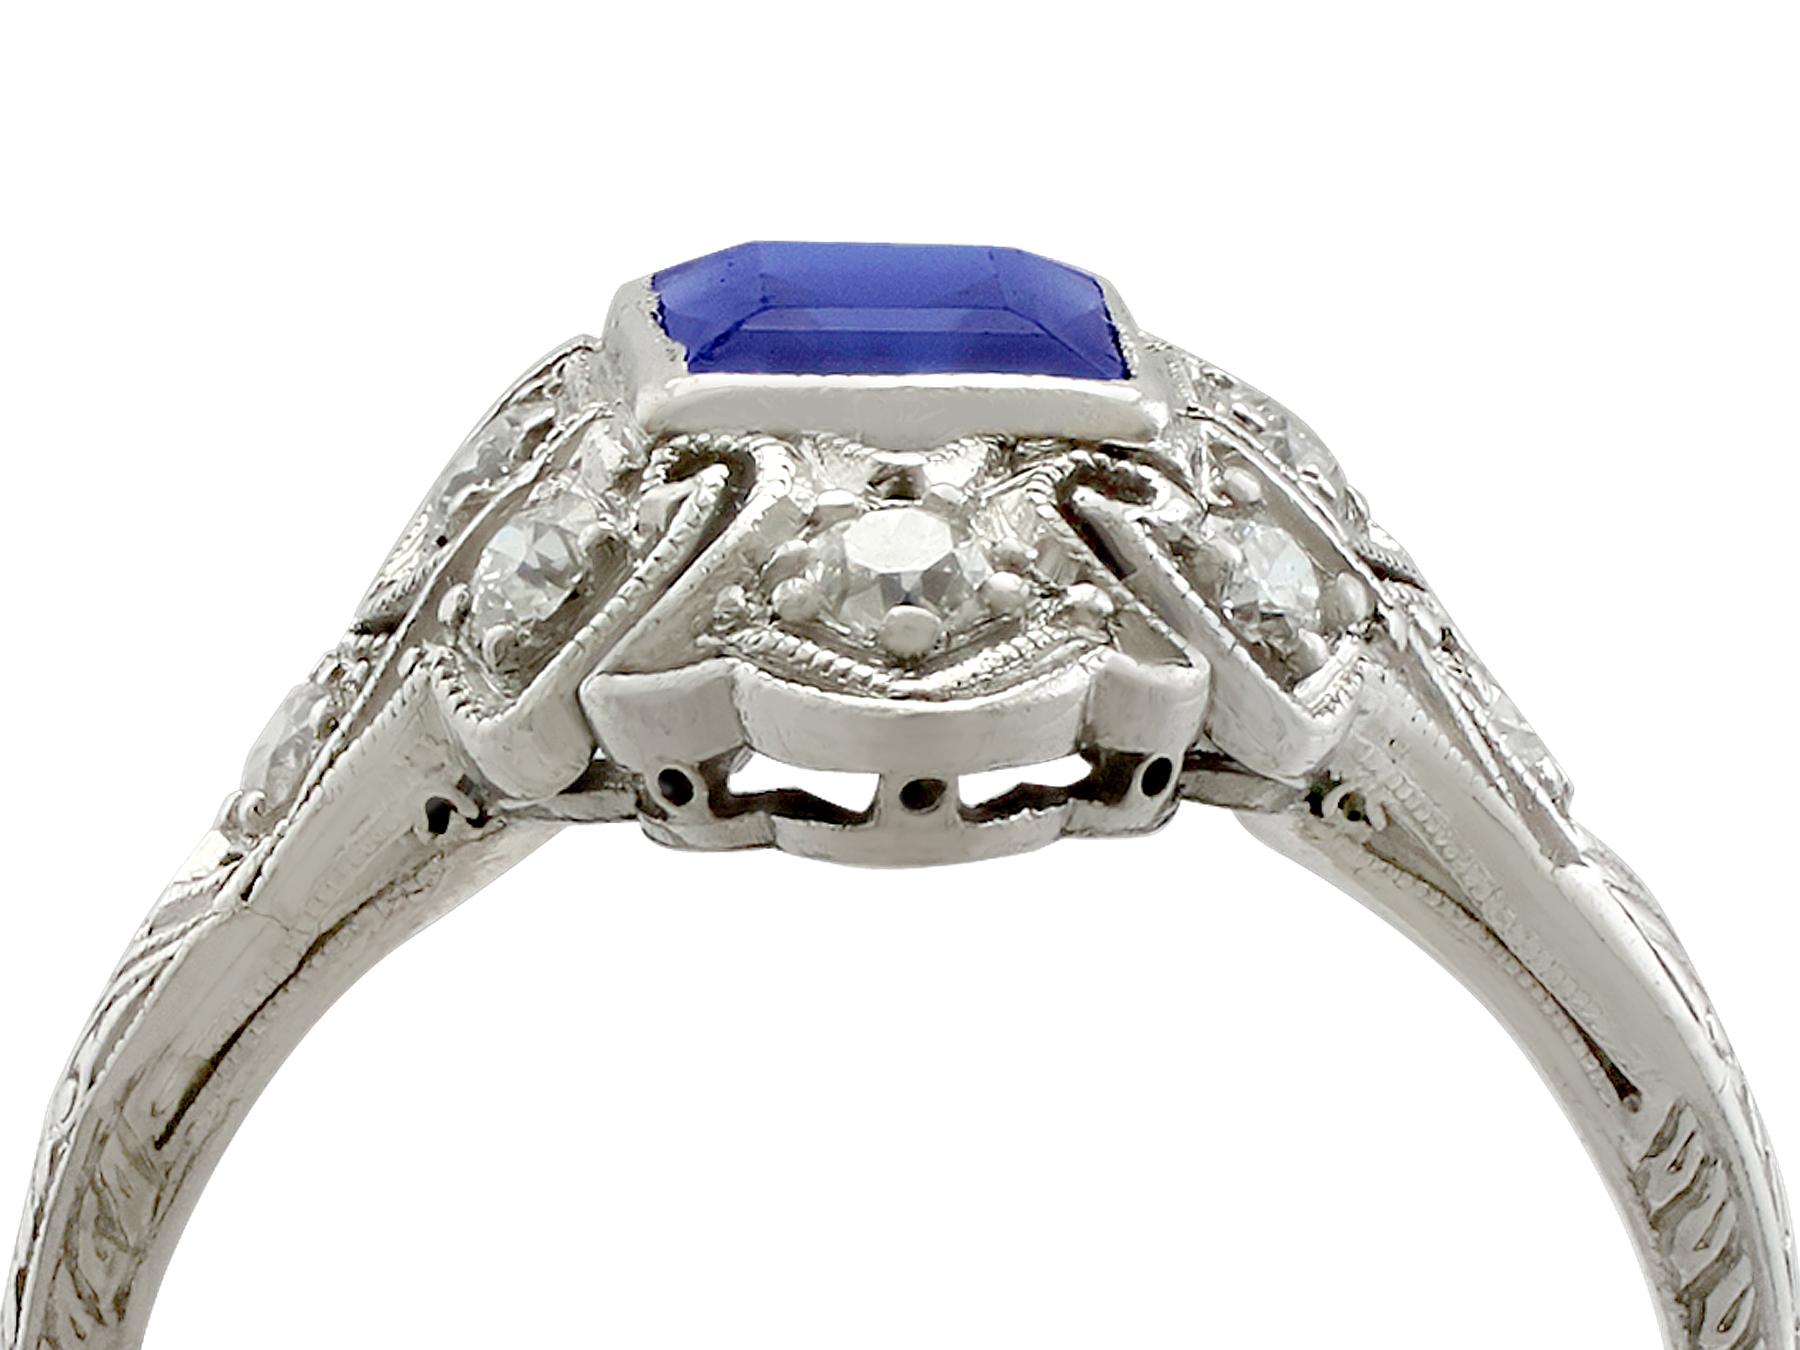 A stunning antique 1930's 0.79 carat blue sapphire and 0.22 carat diamond, platinum marquise shaped dress ring; part of our diverse antique jewelry collections.

This stunning, fine and impressive antique sapphire and diamond ring has been crafted